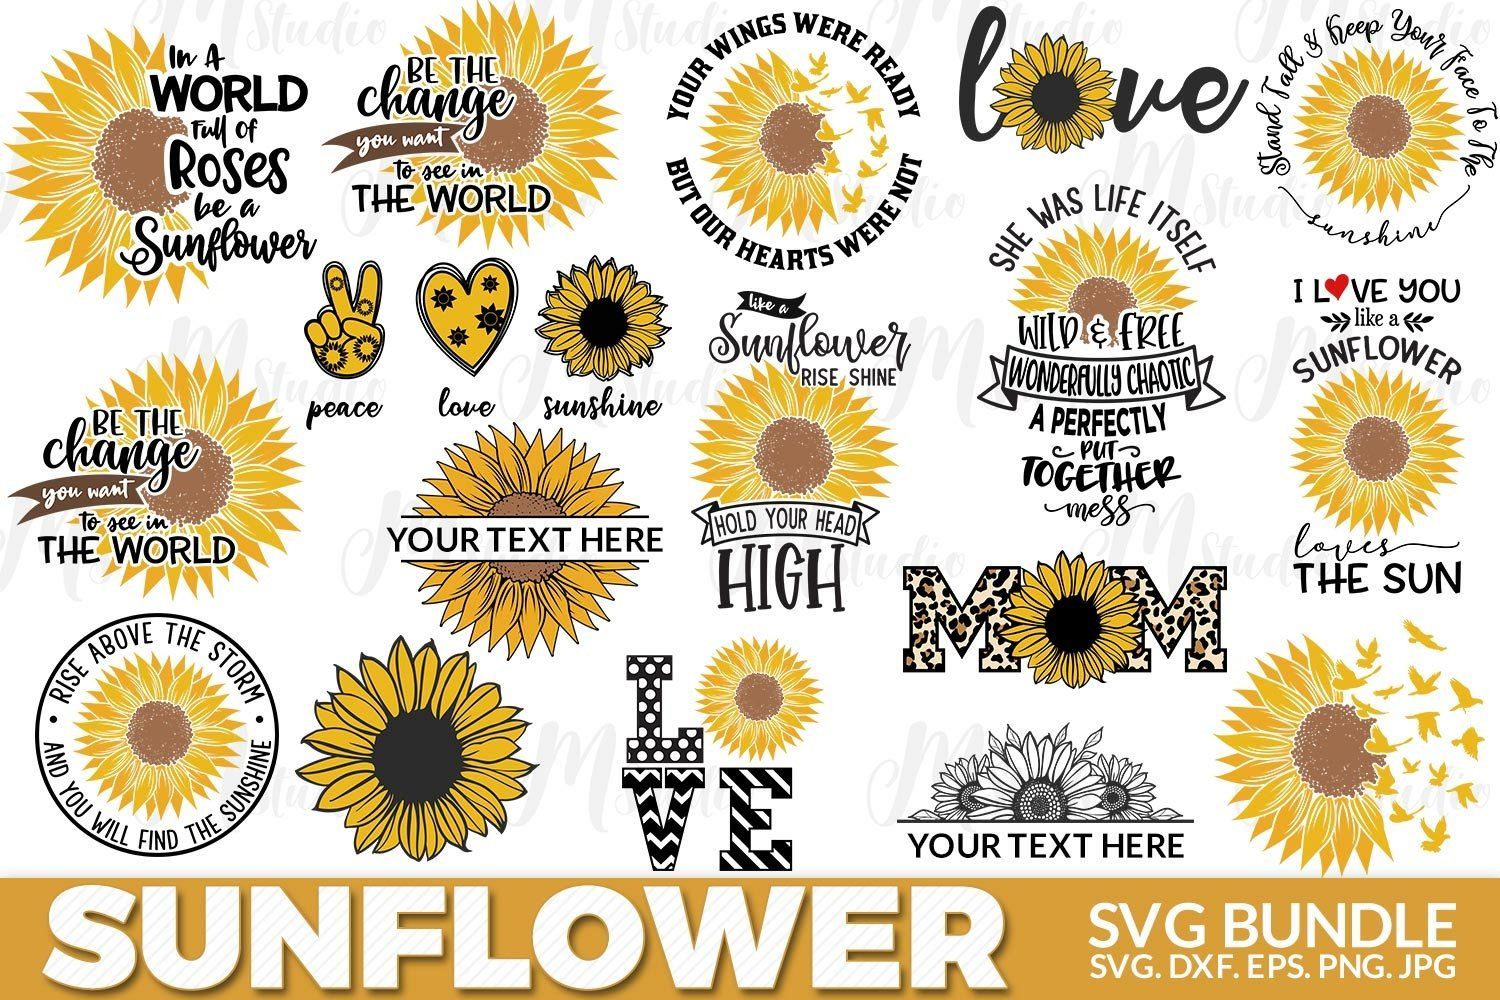 Diverse of sunflowers illustrations.